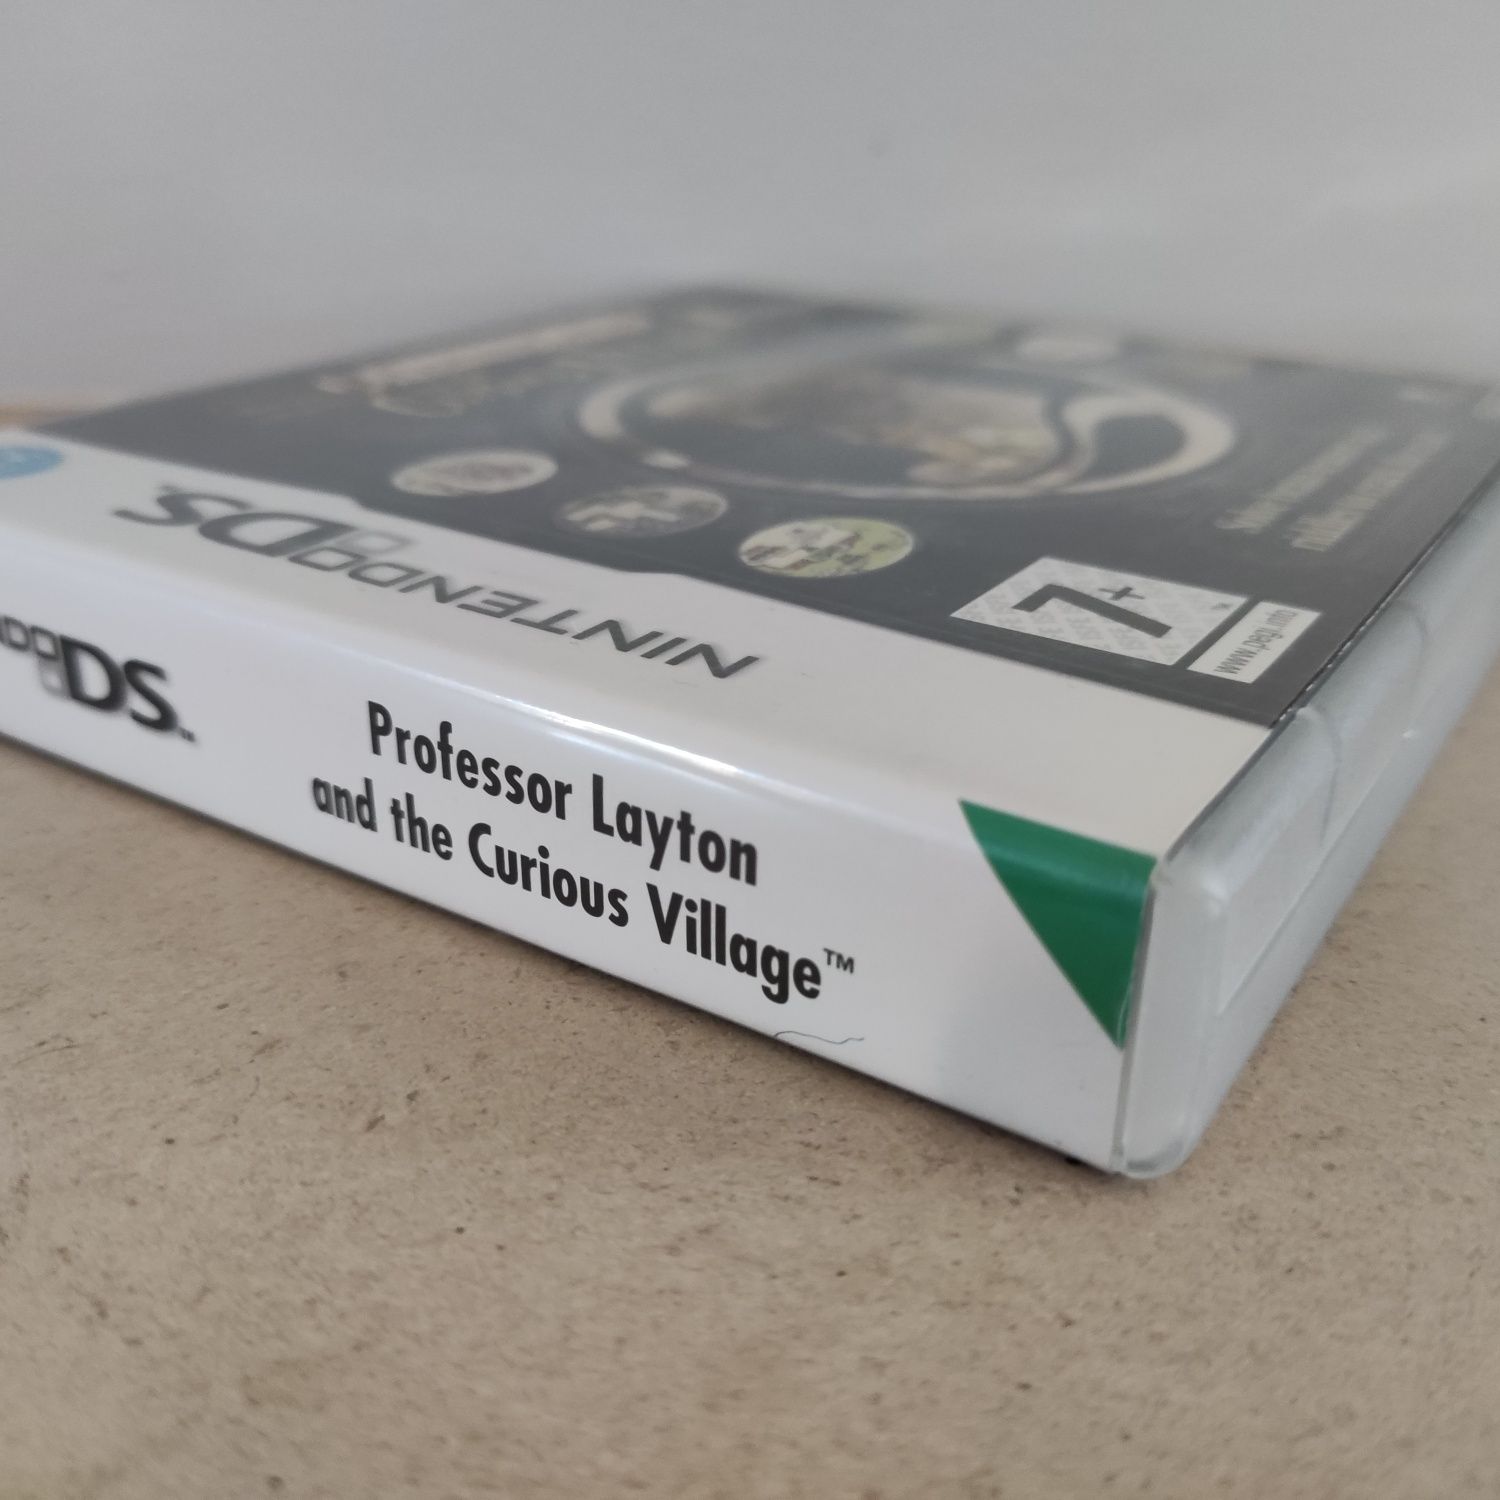 Professor Layton "and the curious village" - Nintendo DS